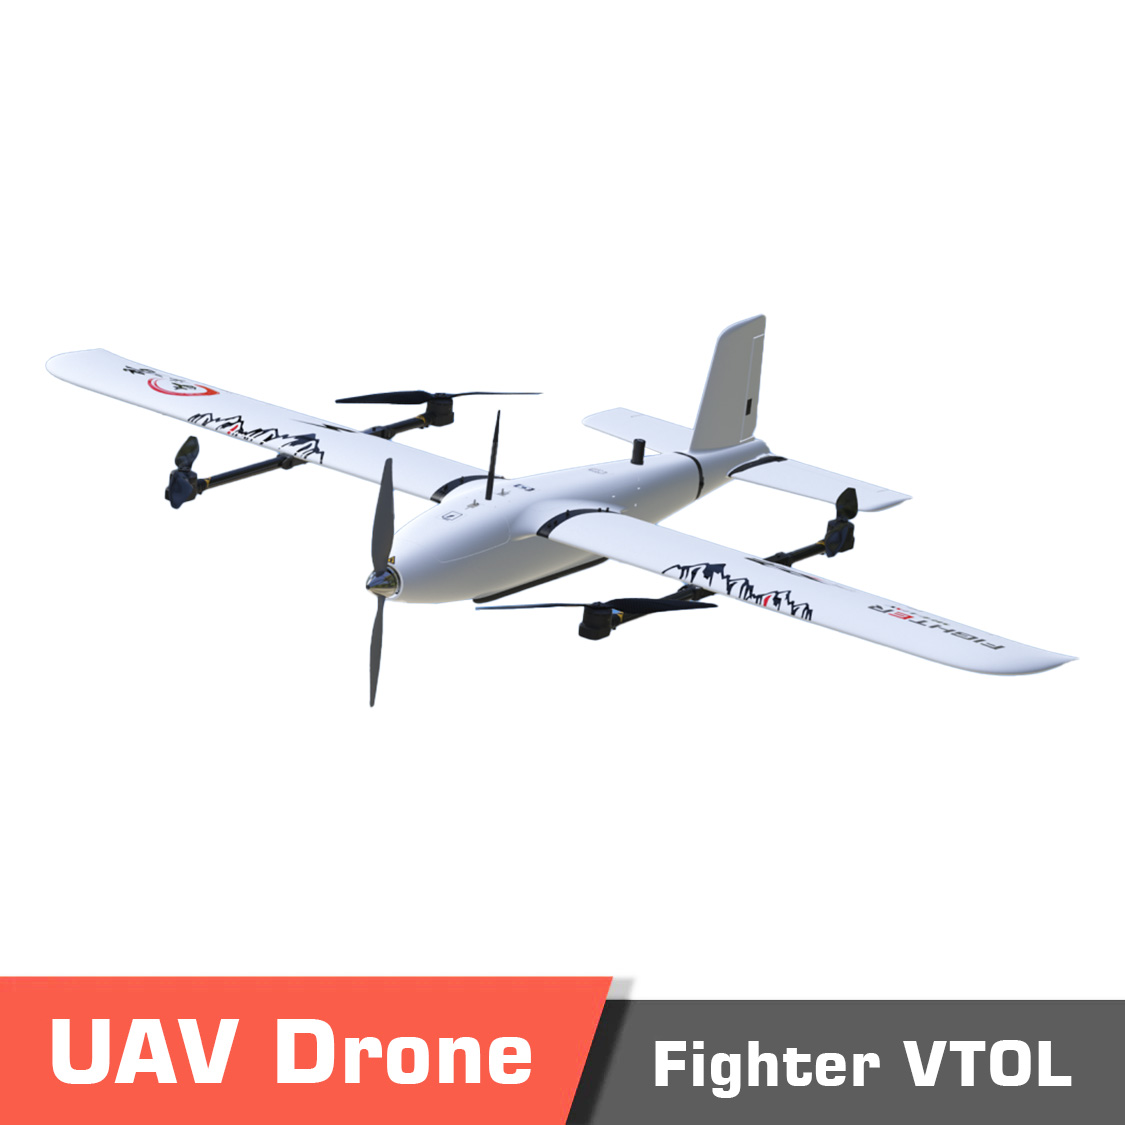 Fighter vtol temp. 2 - mfe fighter hand throw,mfe fighter,fighter hand-throw version,tool-less disassembly and assembly,long endurance,fixedwing uav,cargo drone,conventional aerodynamic drone,long-range aerial mapping platform,high-capacity vtol uav,precision agriculture drone,engineering survey uav,environmental monitoring platform,fixed-wing flight equipment,topographic mapping uav,drone for land surveying - motionew - 2